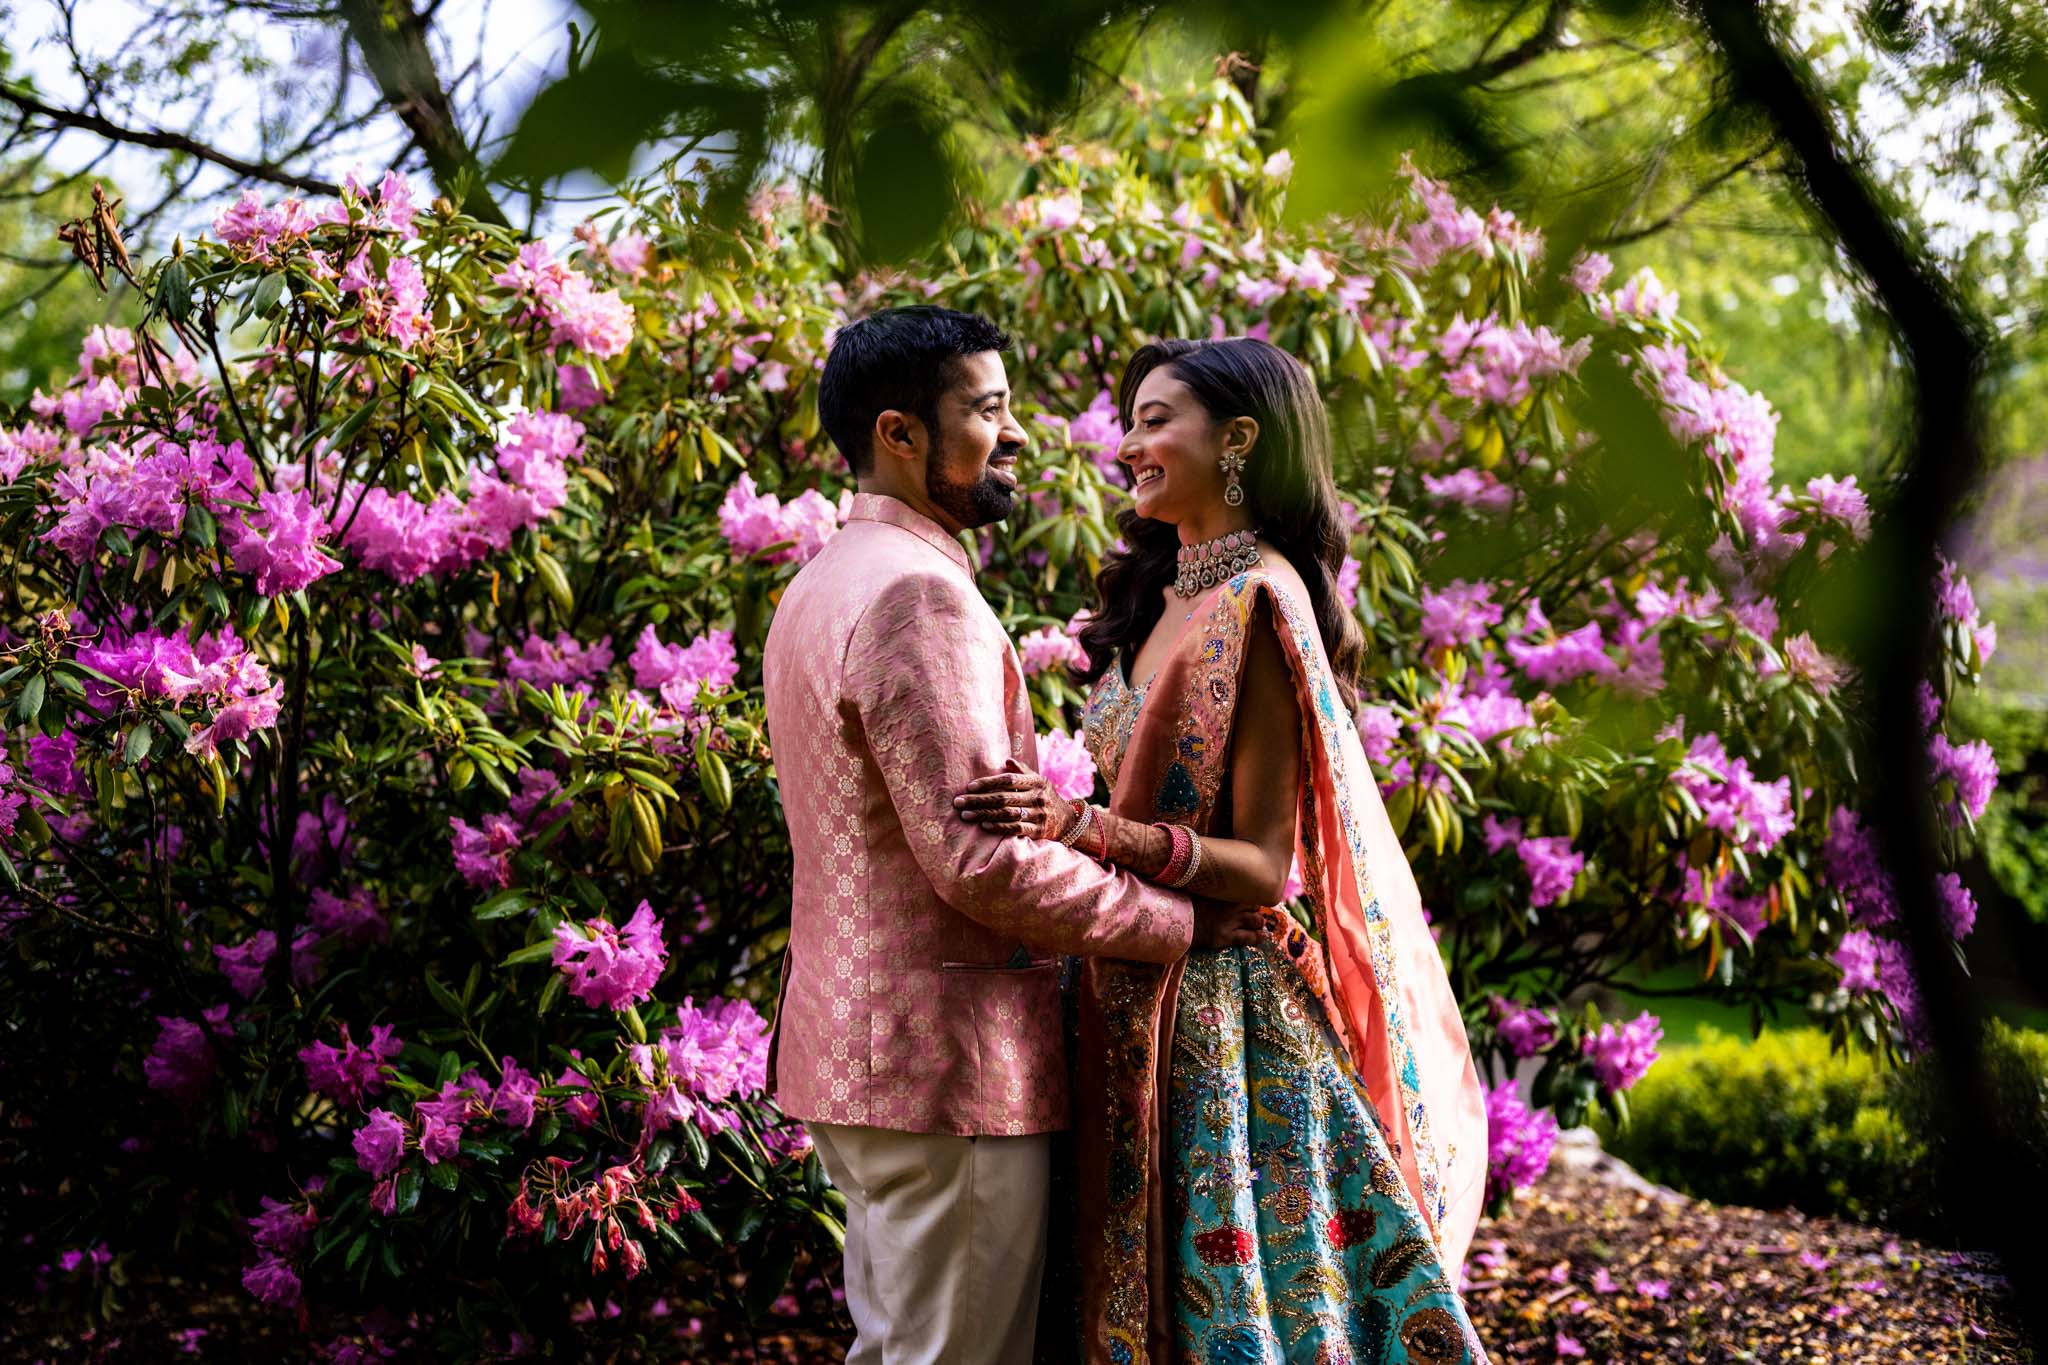 An Indian bride and groom embracing in front of pink flowers at a Biltmore Estate wedding.